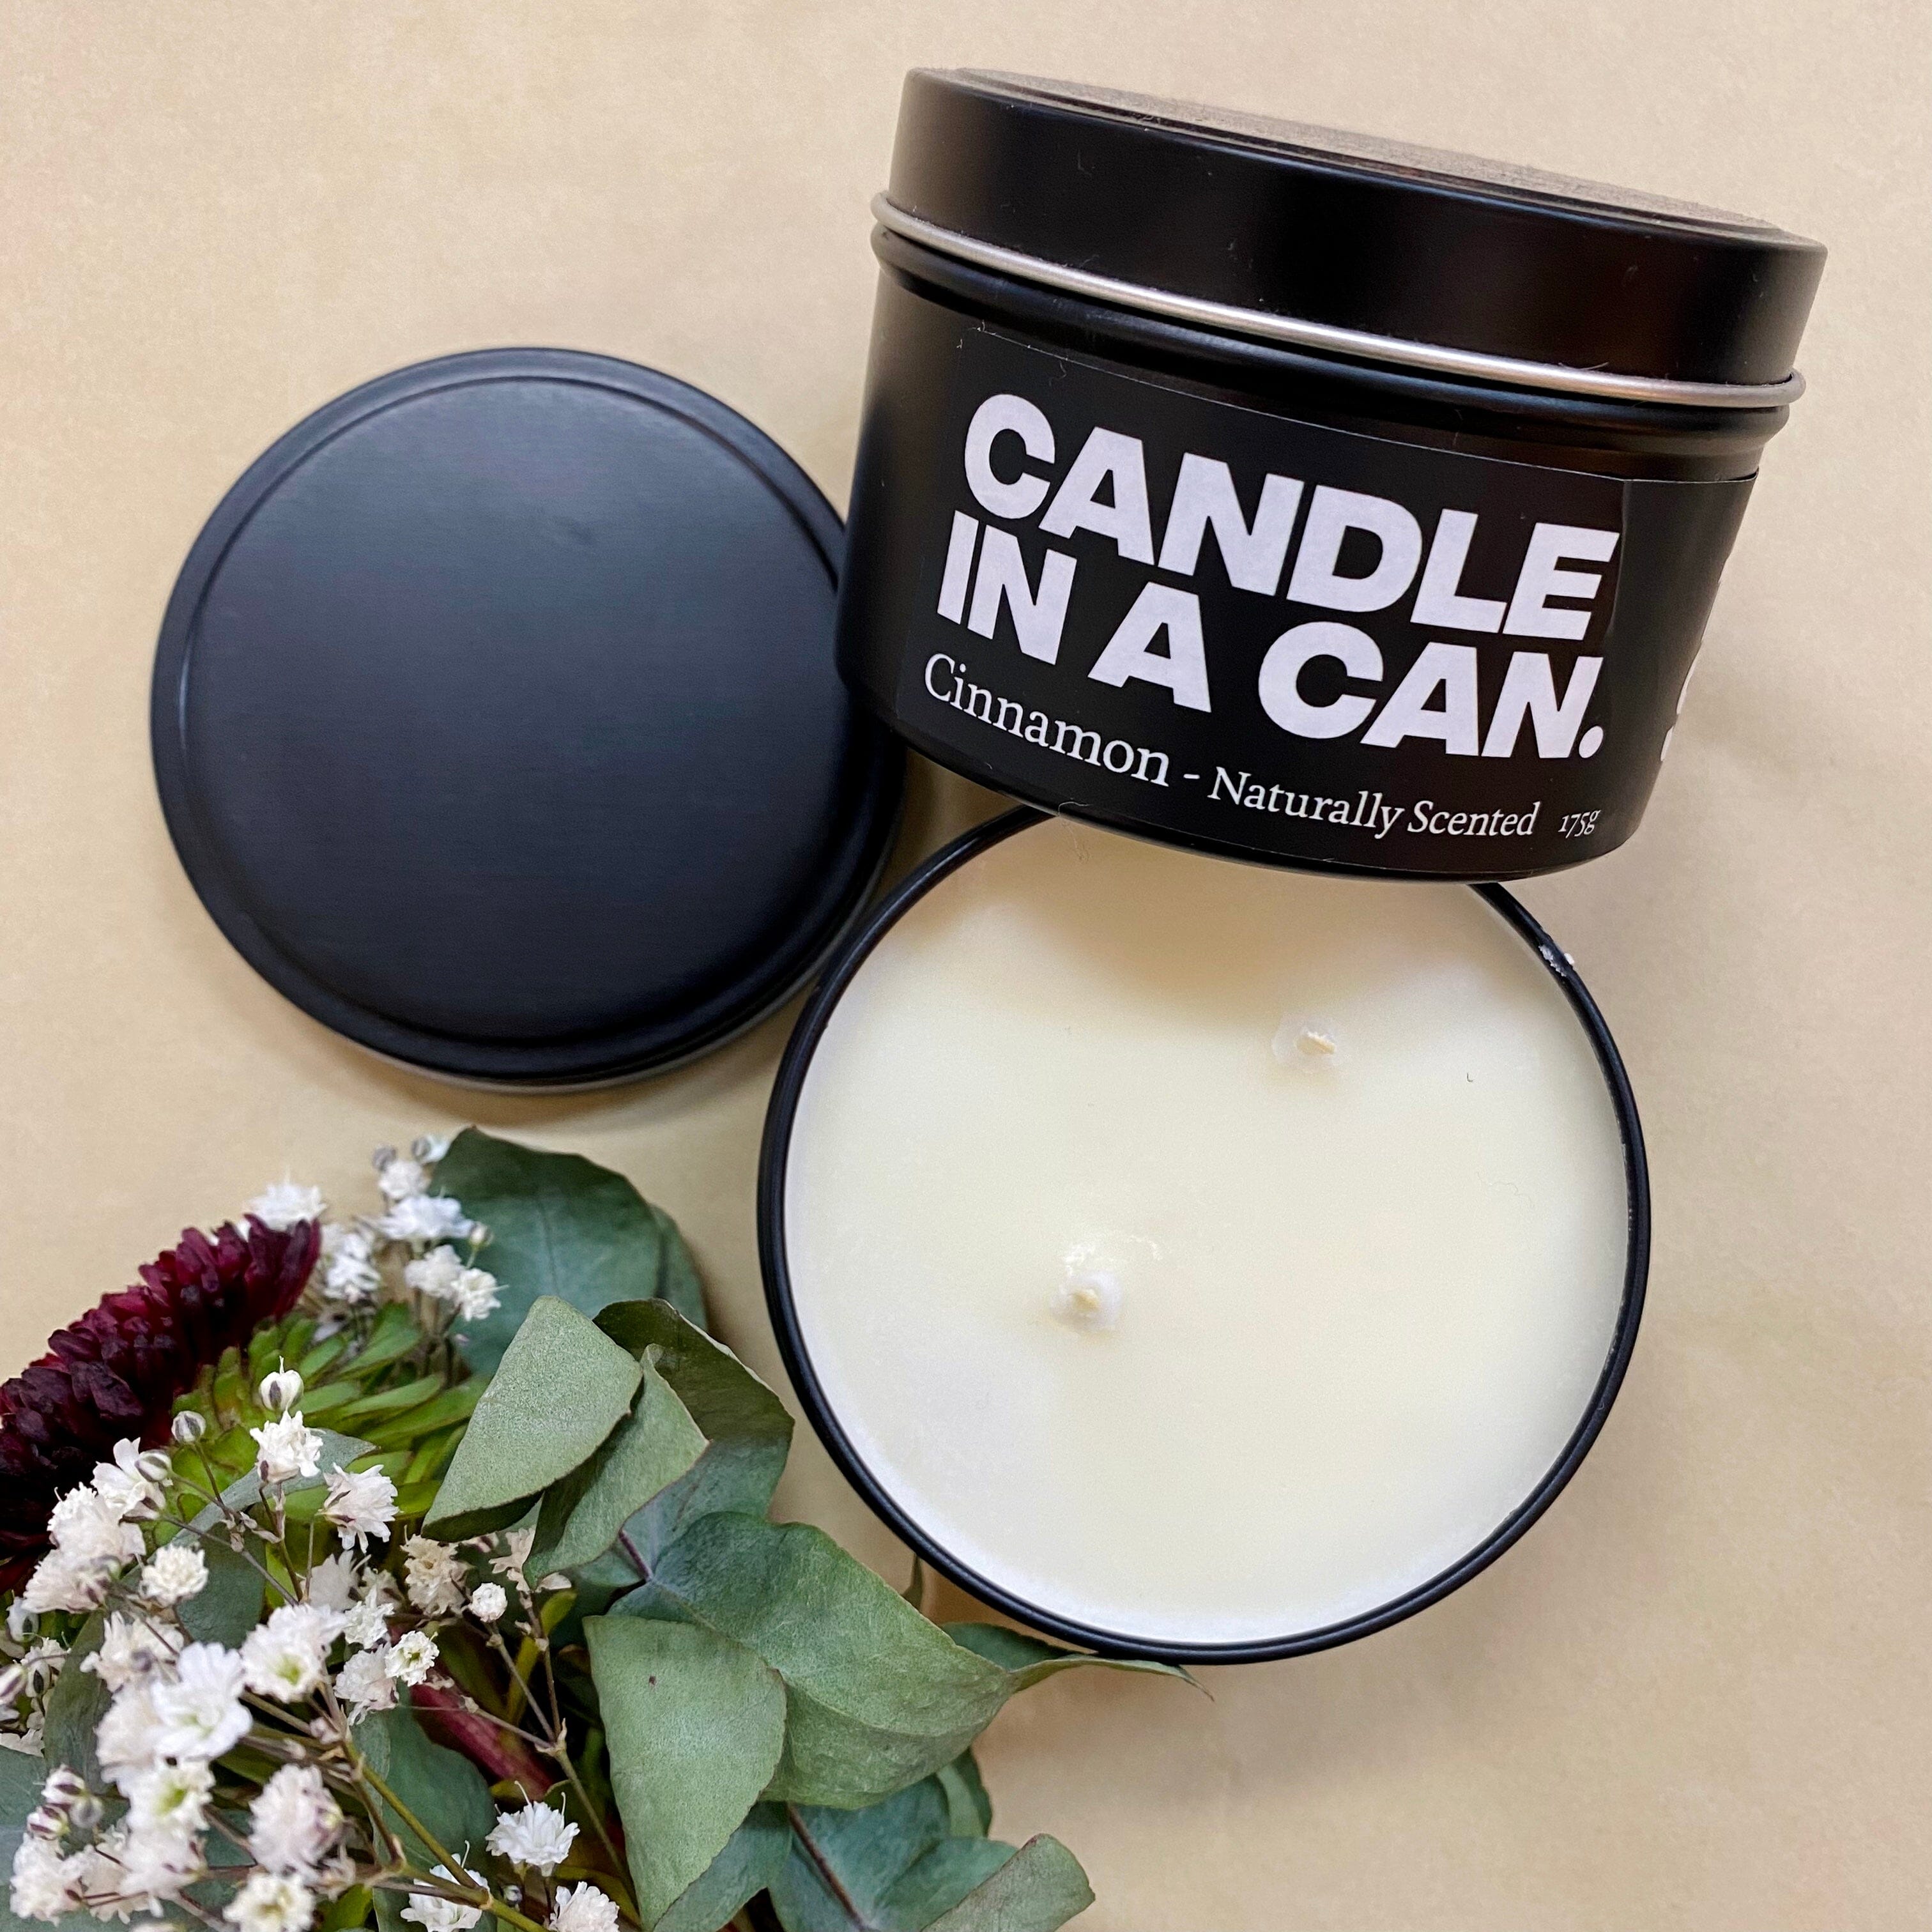 Candle in a Can by Trouble Smiths Candles Trouble Smiths Cinnamon 